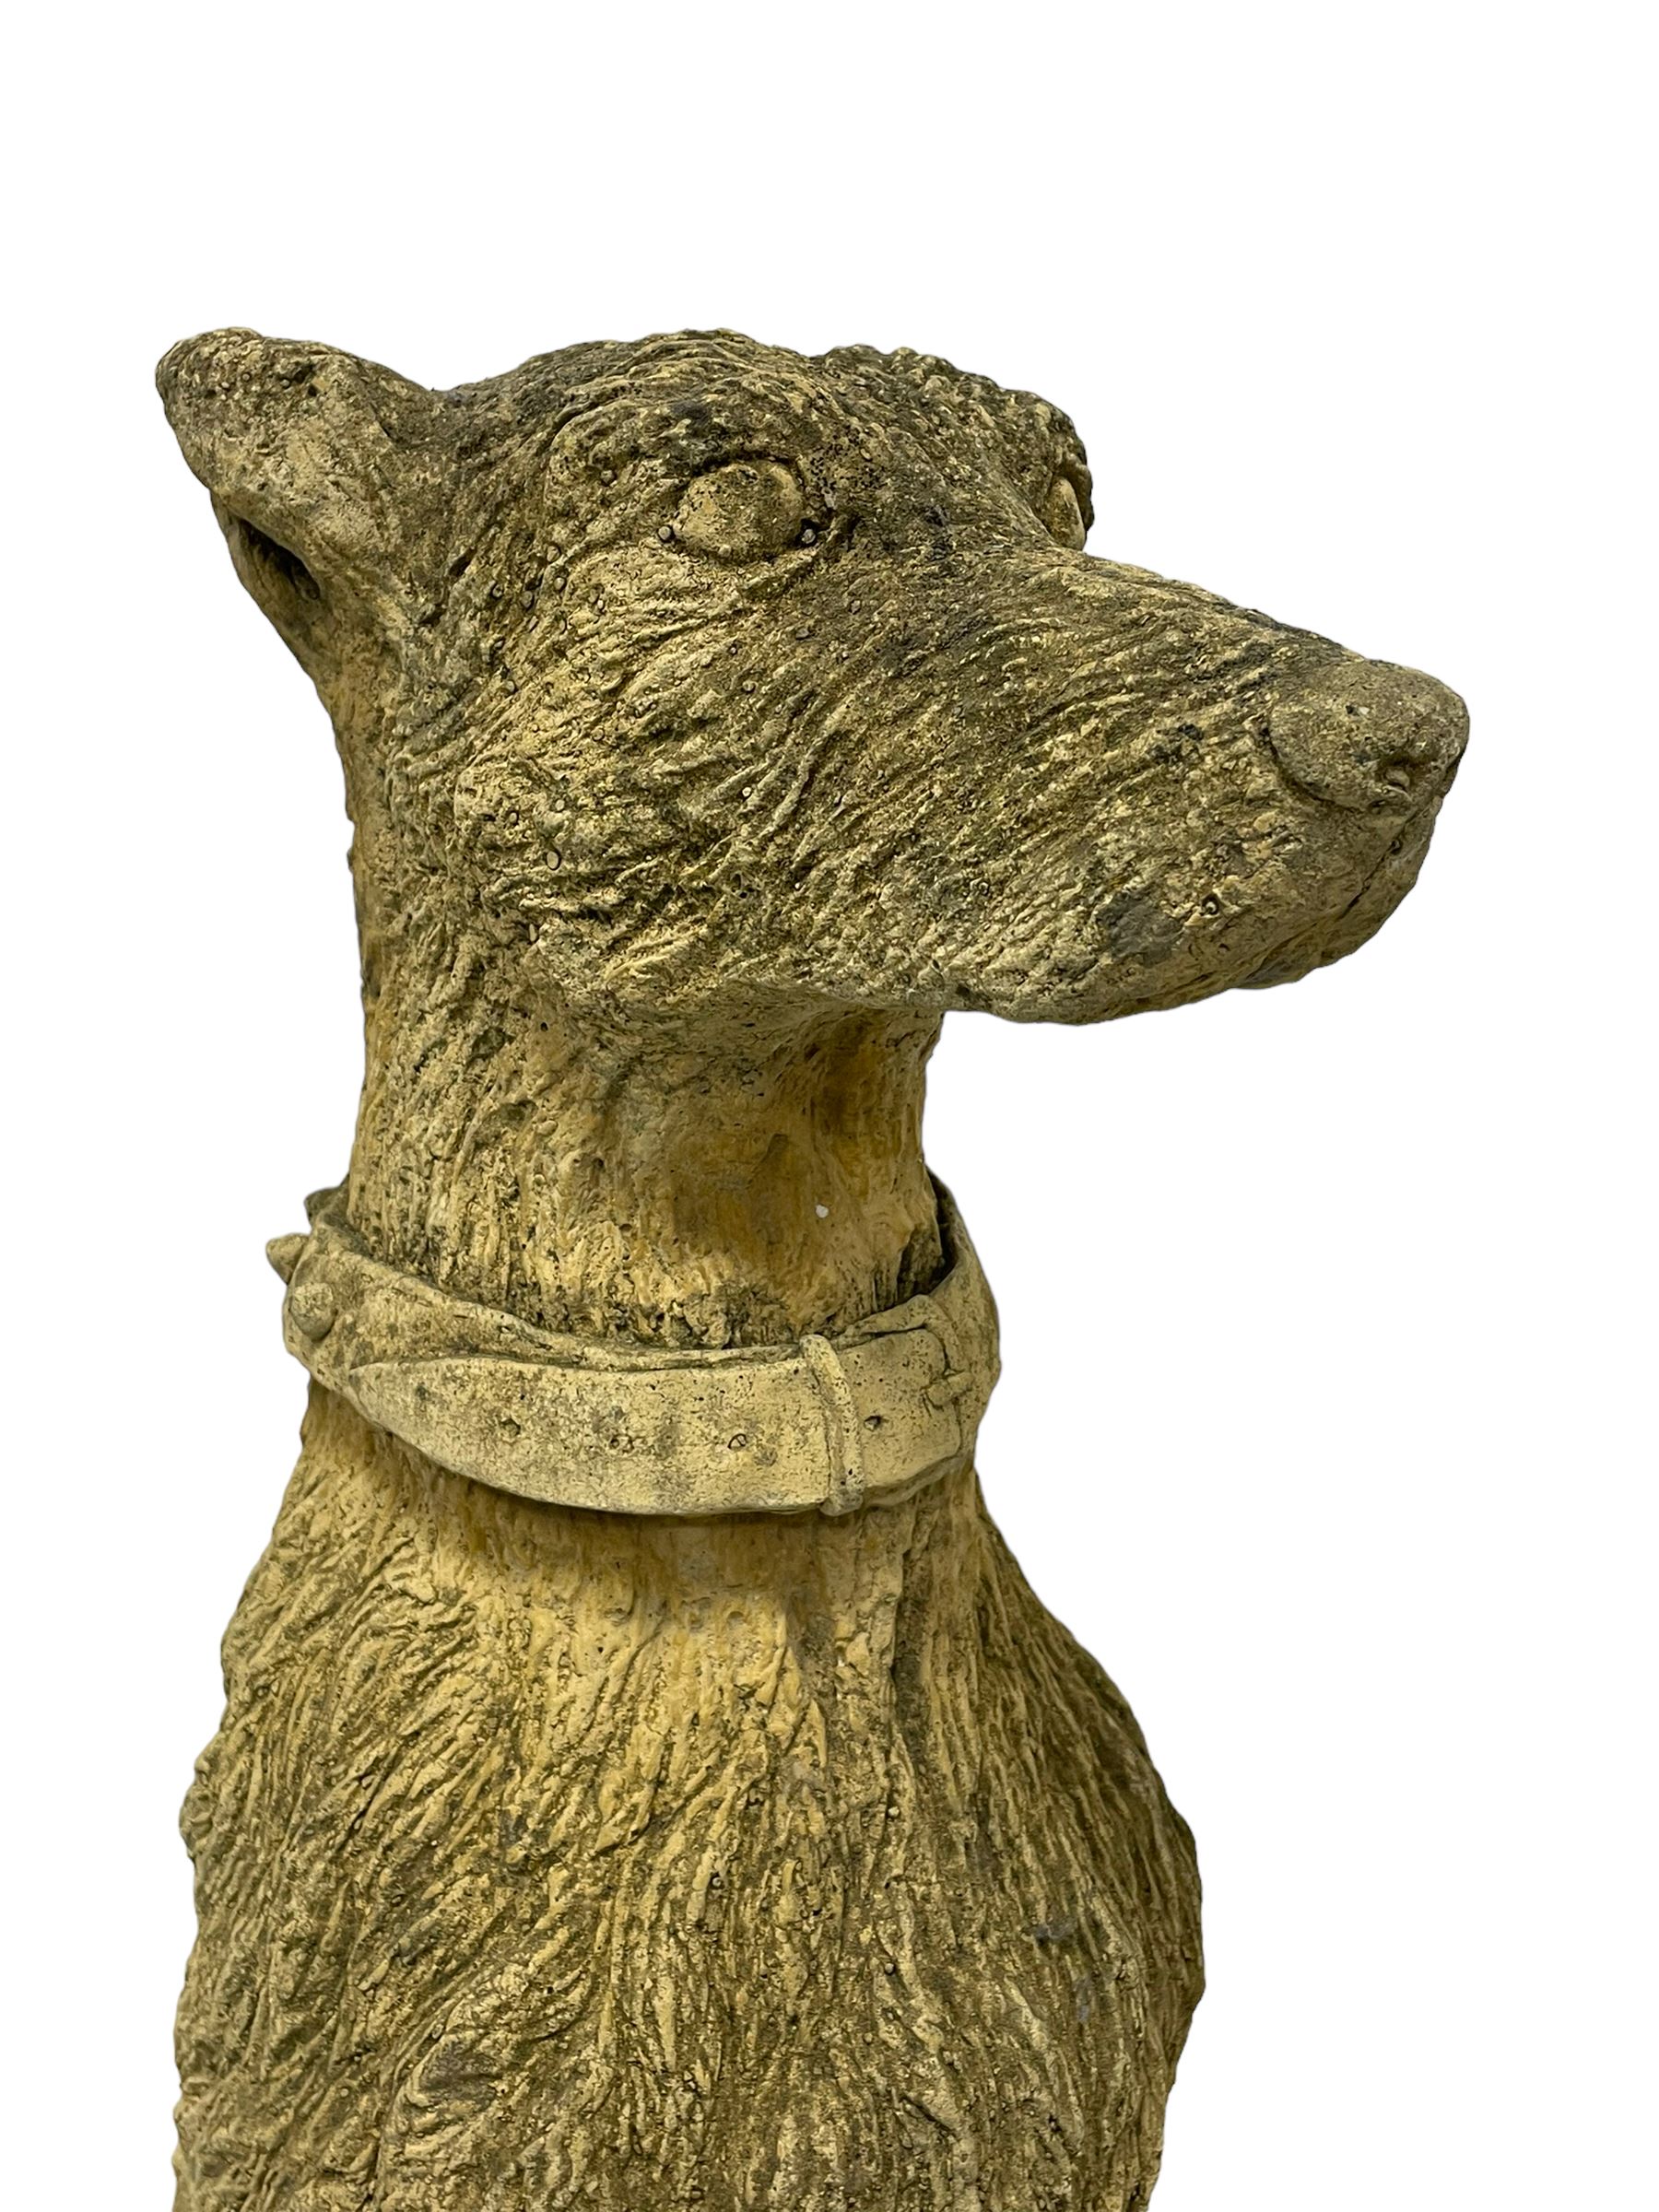 Pair of composite stone garden ornaments in the form of seated lurchers - Image 5 of 8